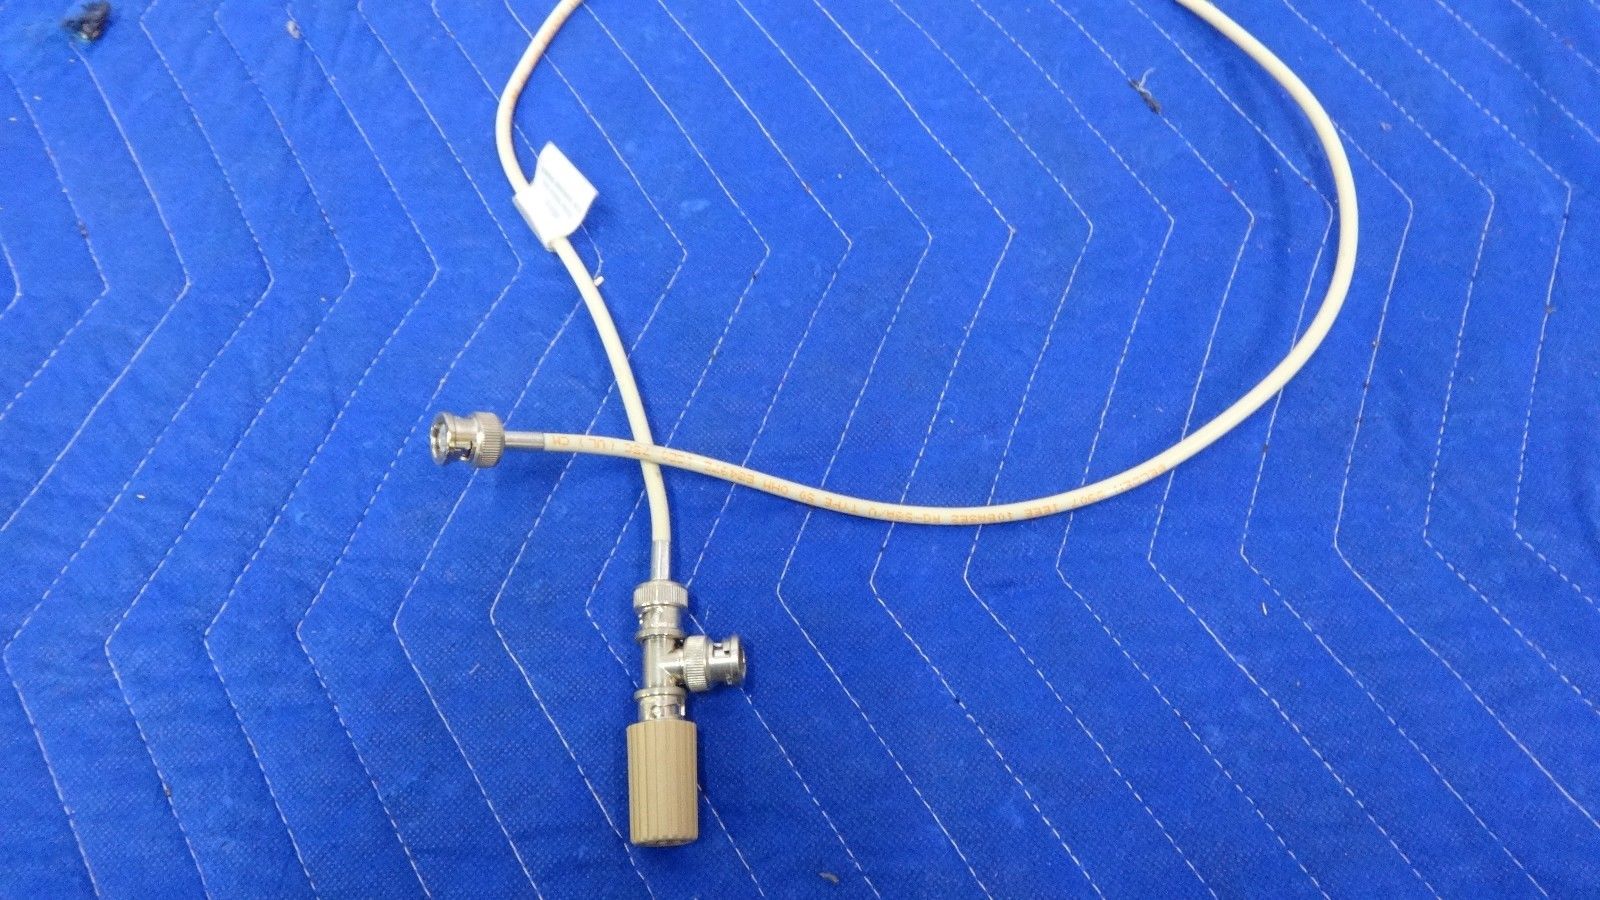 a white cord connected to a white device on a blue surface